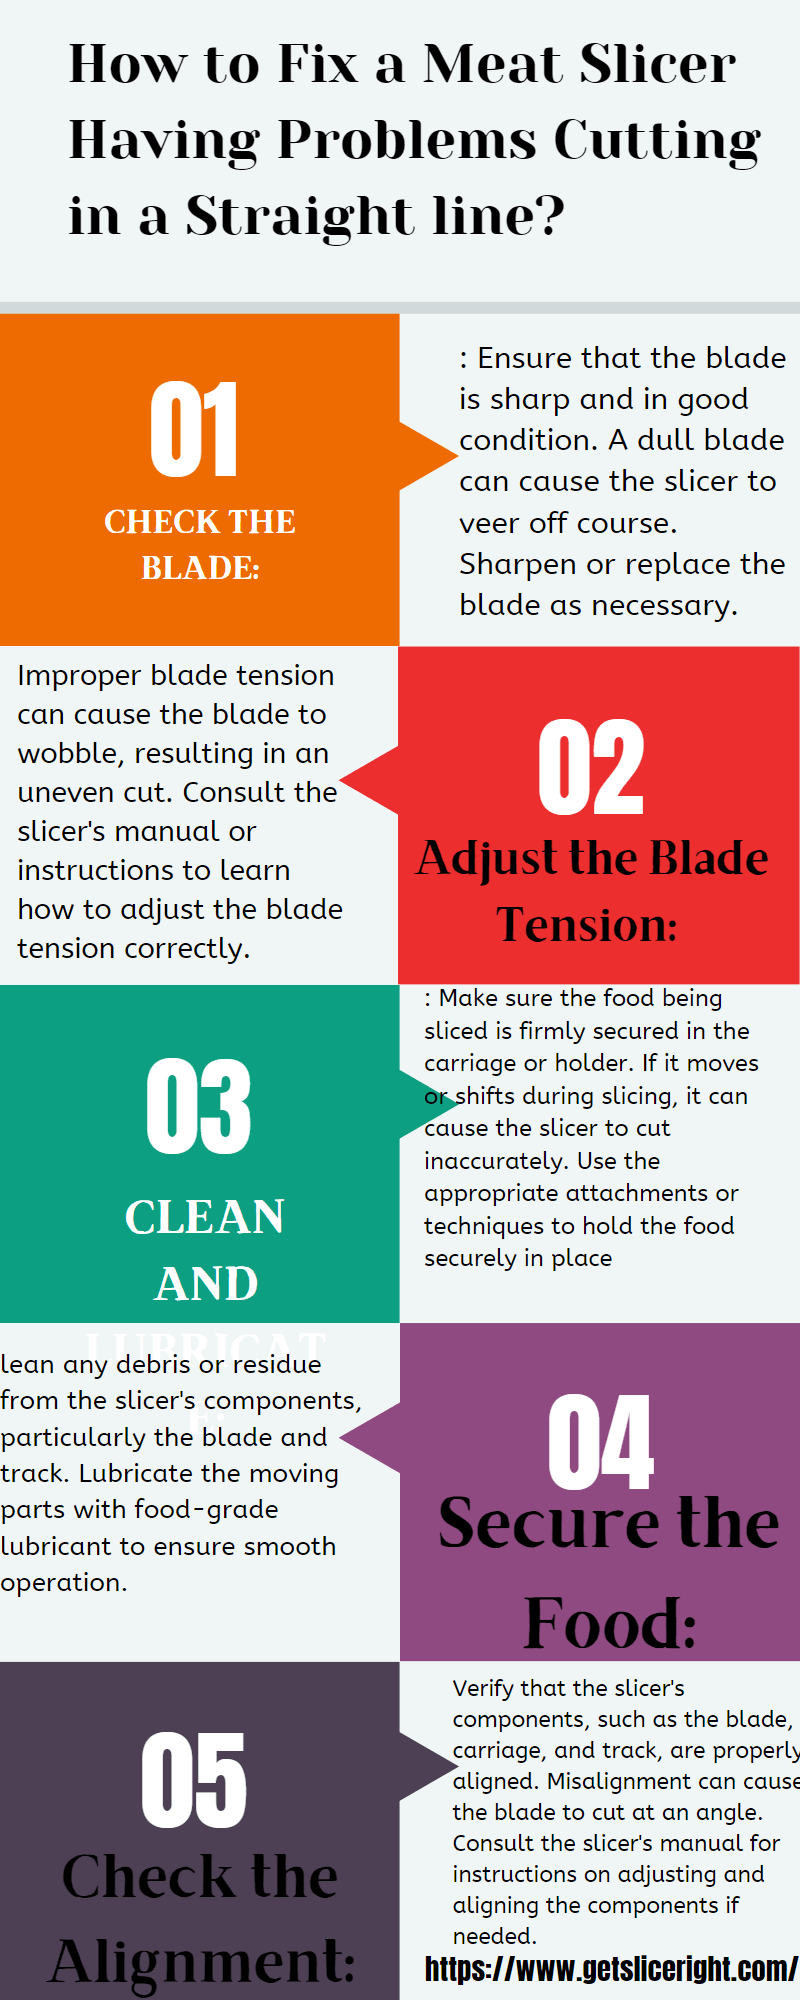 How to fix a meat slicer having problems cutting in a straight line - Getsliceright Infographic